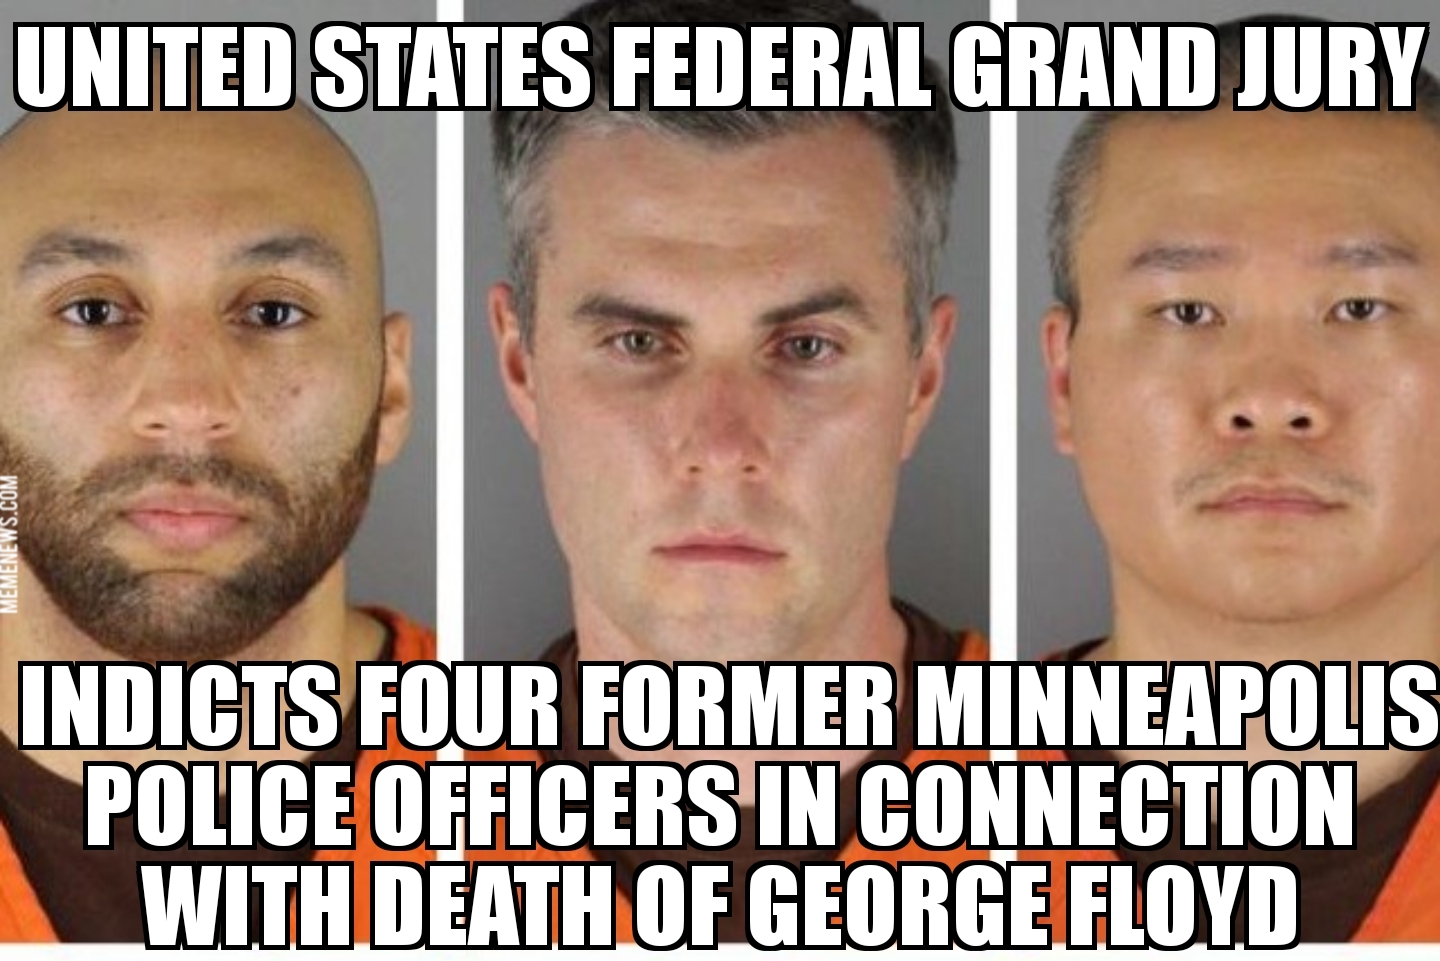 Officers indicted over George Floyd death